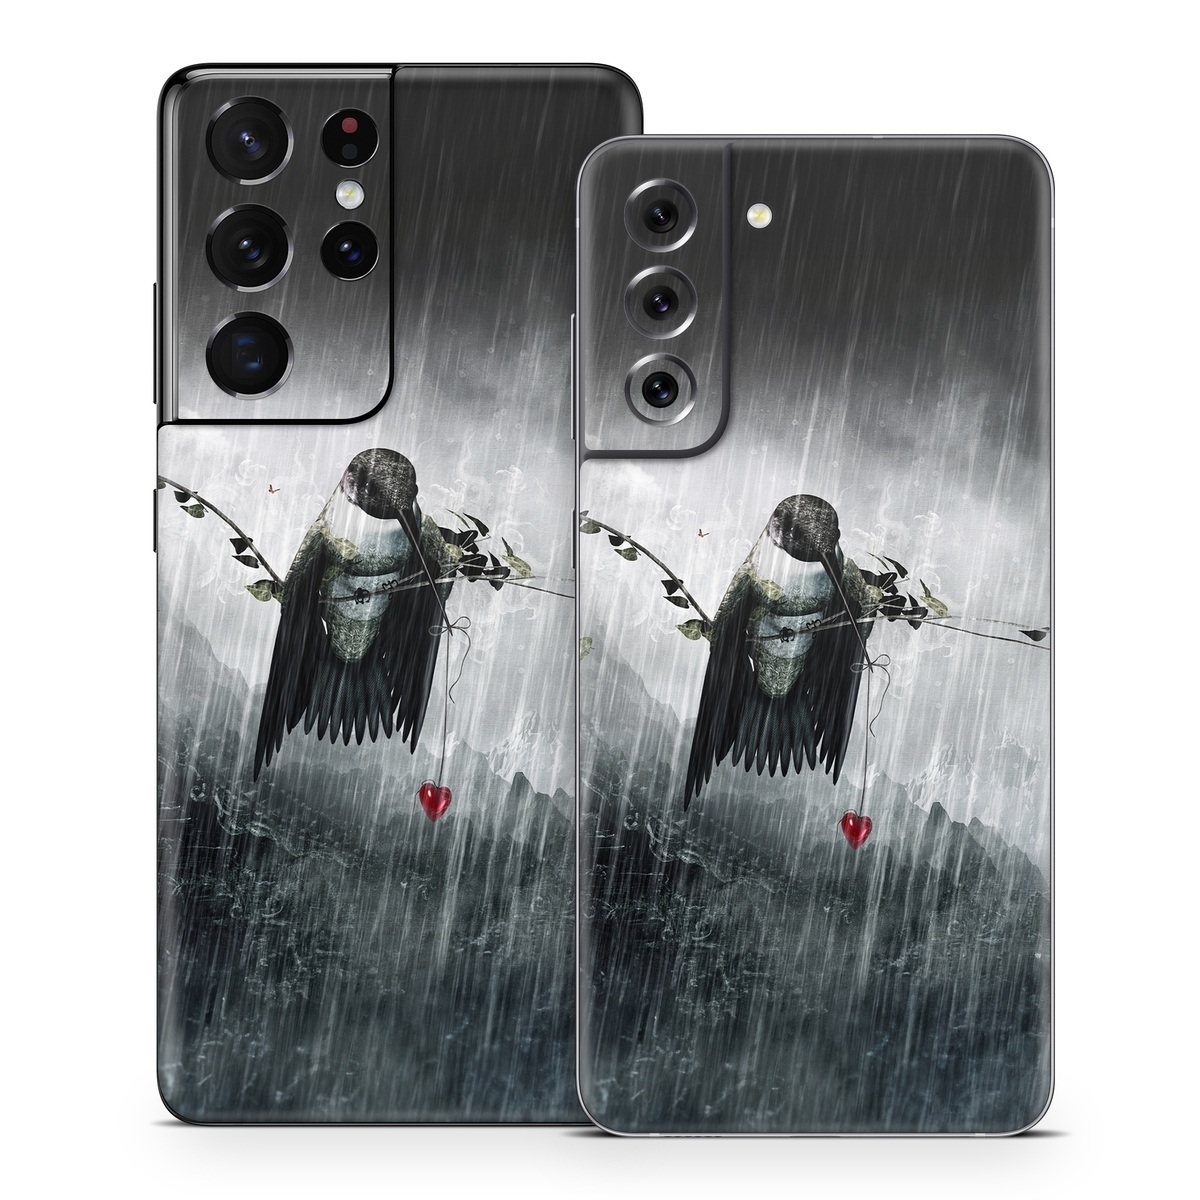 Samsung Galaxy S21 Series Skin design of Water, Cg artwork, Graphic design, Fictional character, Darkness, Illustration, with black, gray, white, red colors